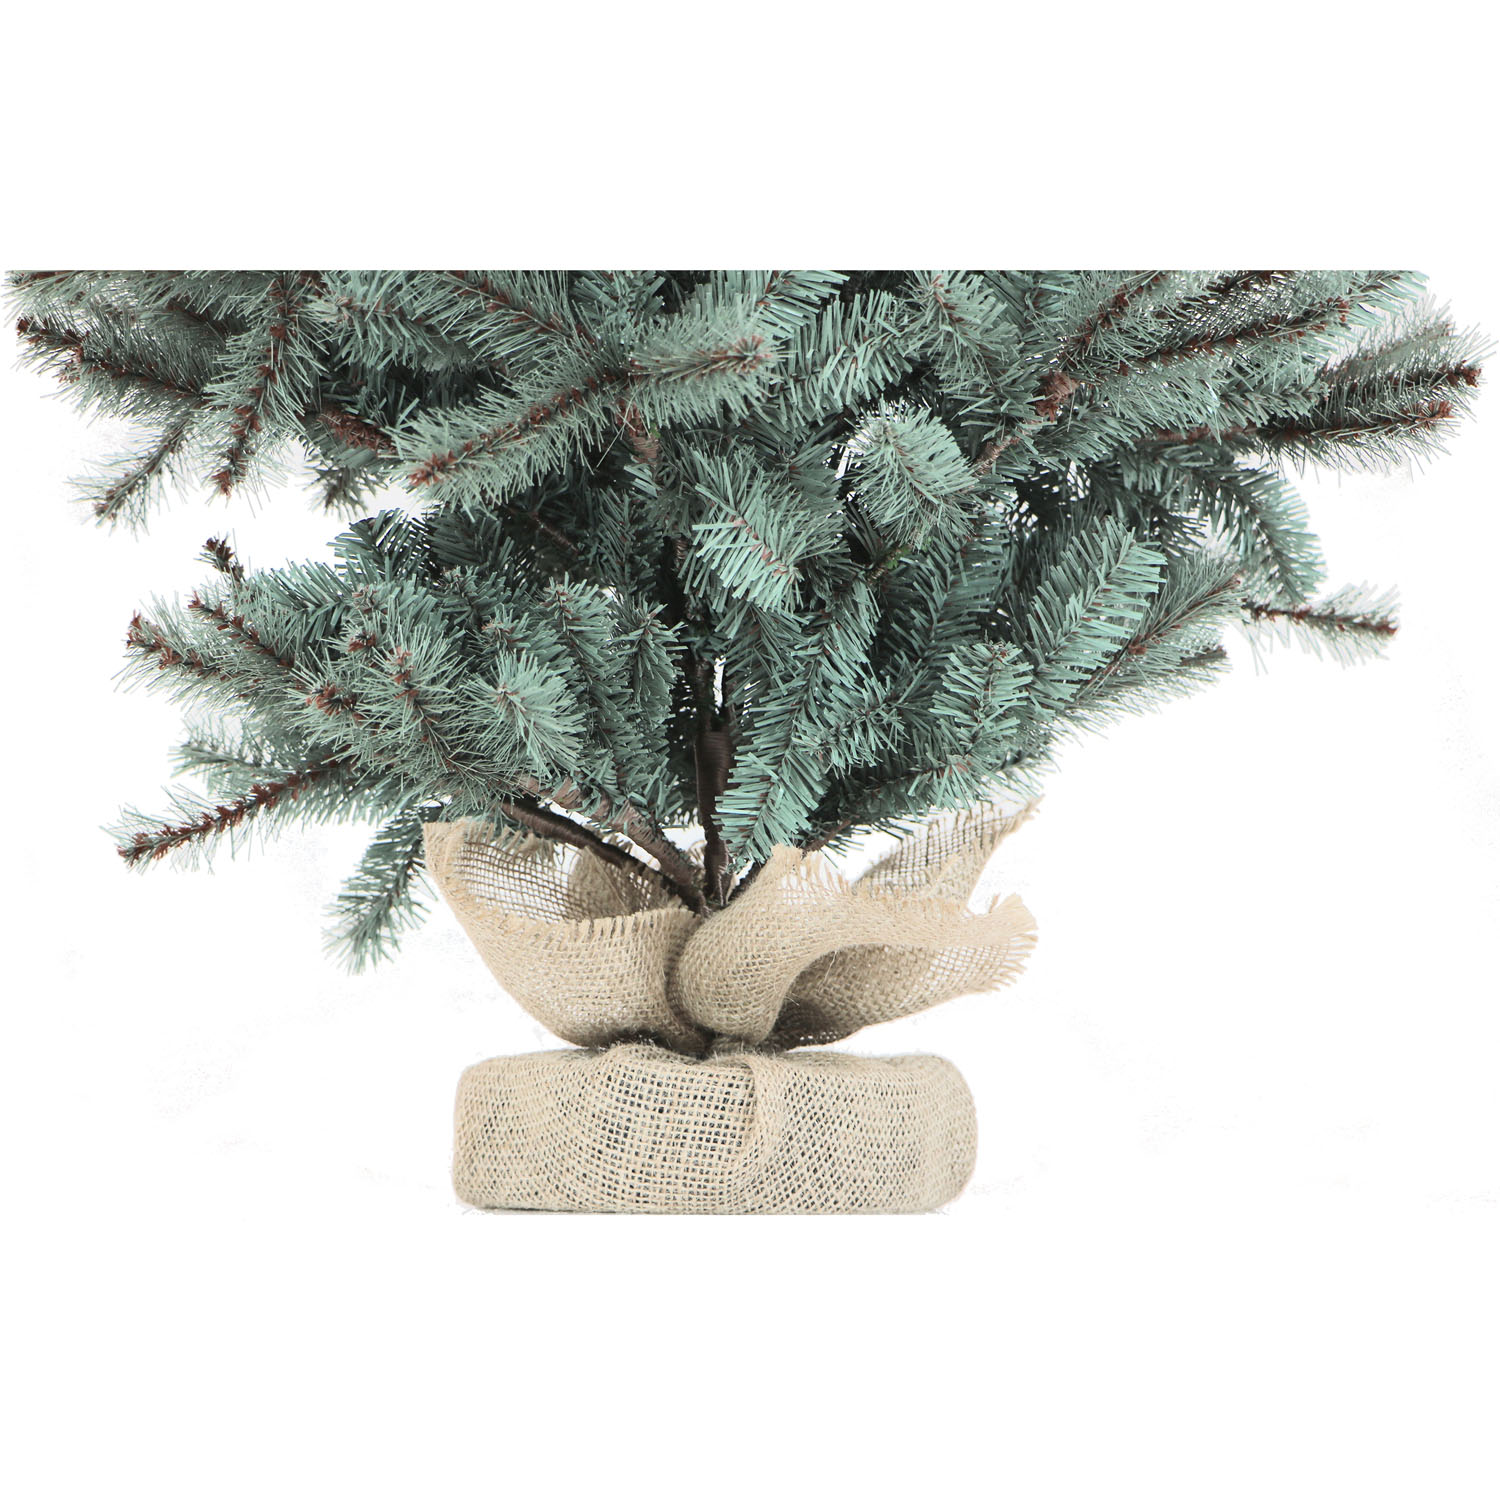 Fraser Hill Farm Set of Two 4-Ft. Heritage Pine Artificial Trees with Burlap Bases - image 4 of 4